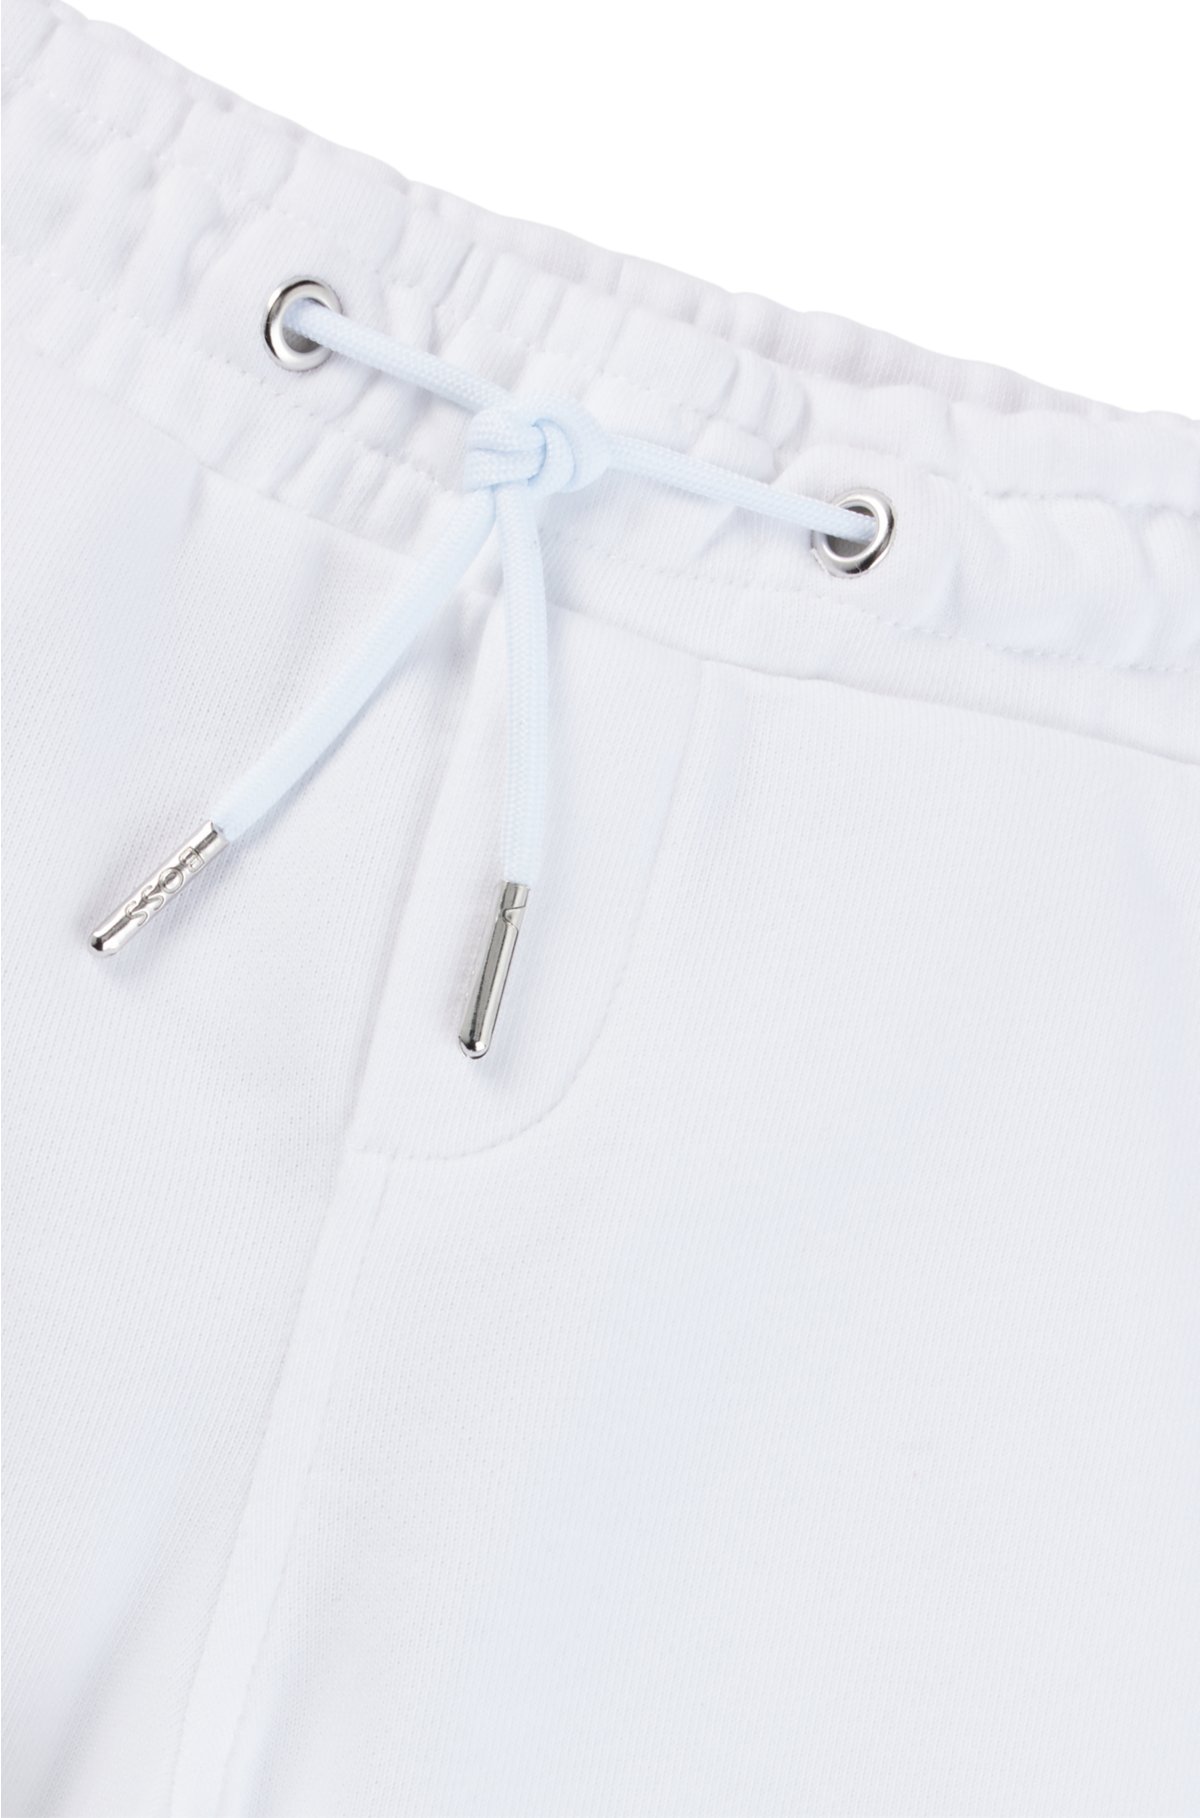 Kids' cuffed tracksuit bottoms with logo print, White